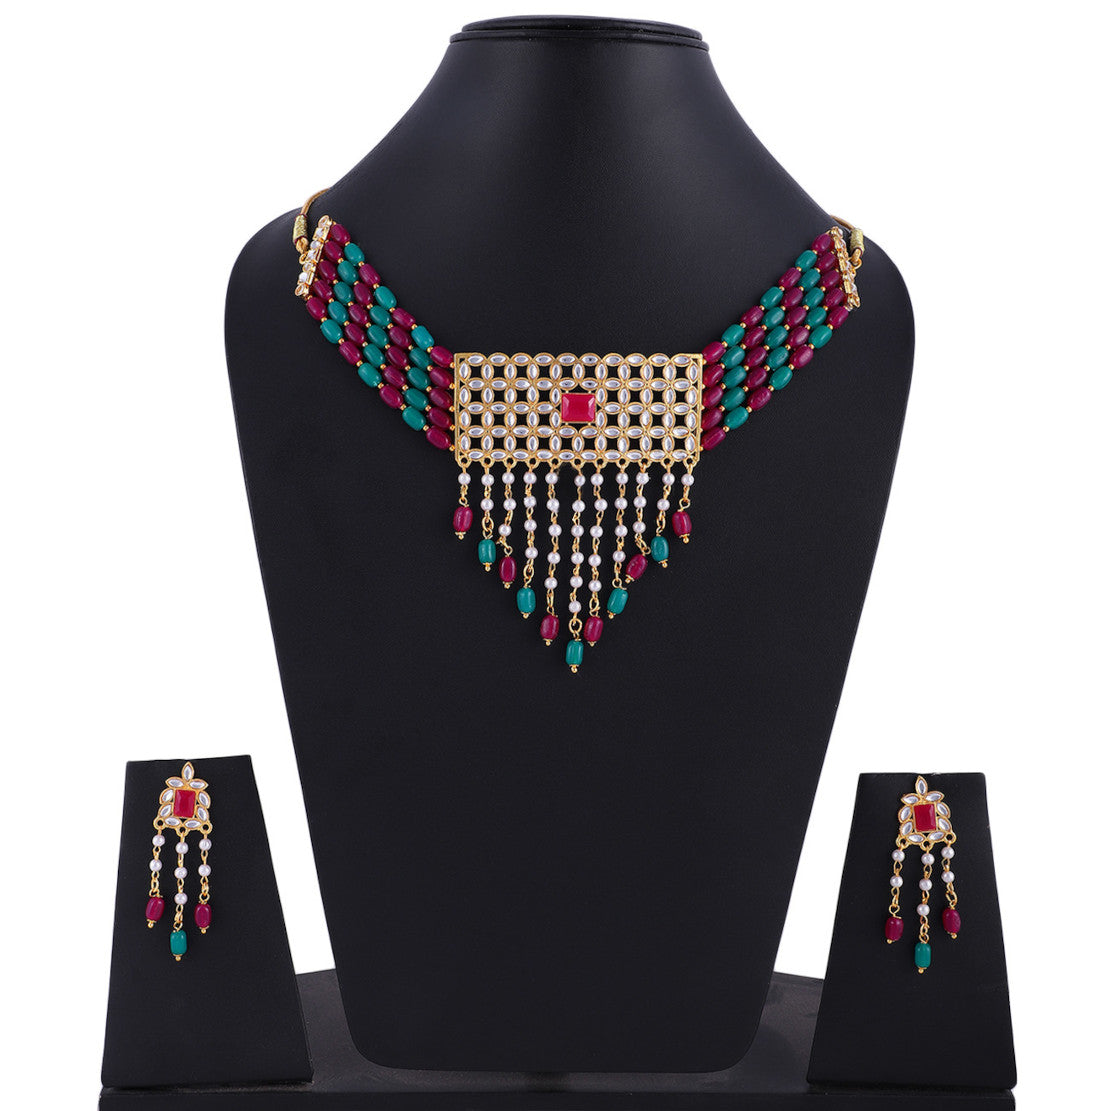 Best Traditional Handcrafted Designed by Mekkna Multicolor Necklace set for Women | Buy This Necklace with Earrings Online from Mekkna